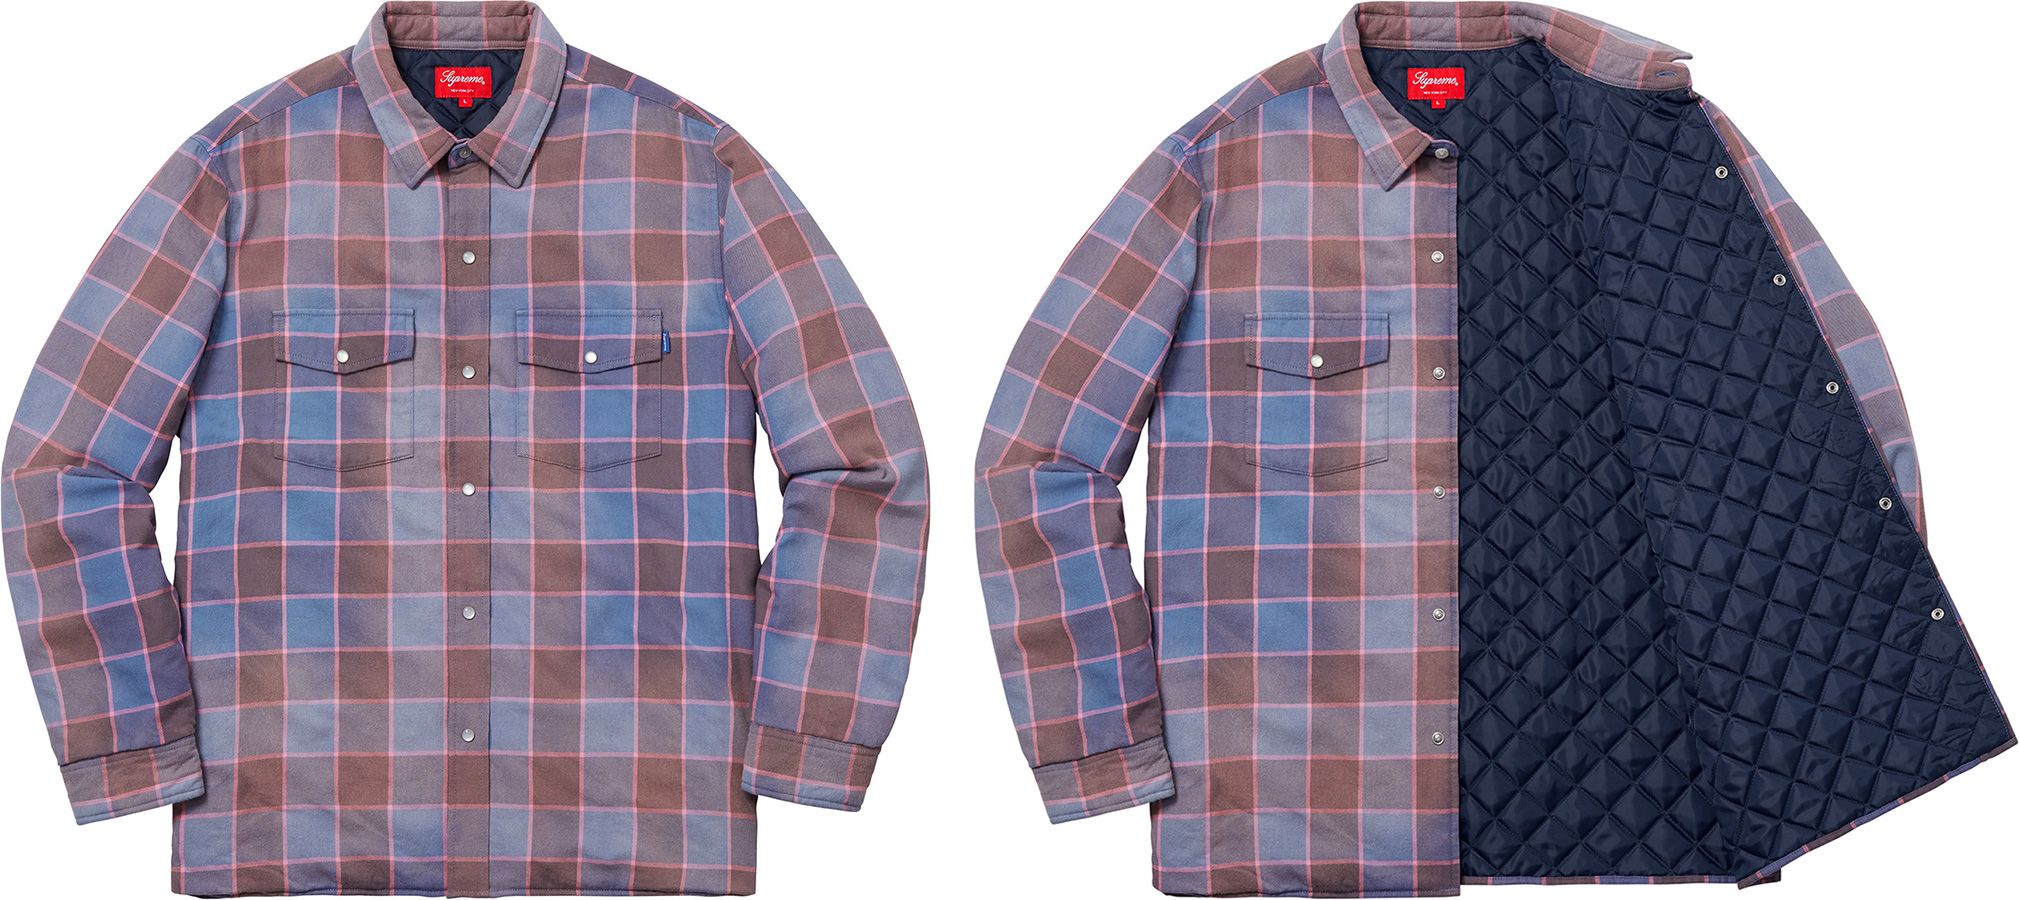 Quilted Faded Plaid Shirt - Fall/Winter 2018 Preview – Supreme